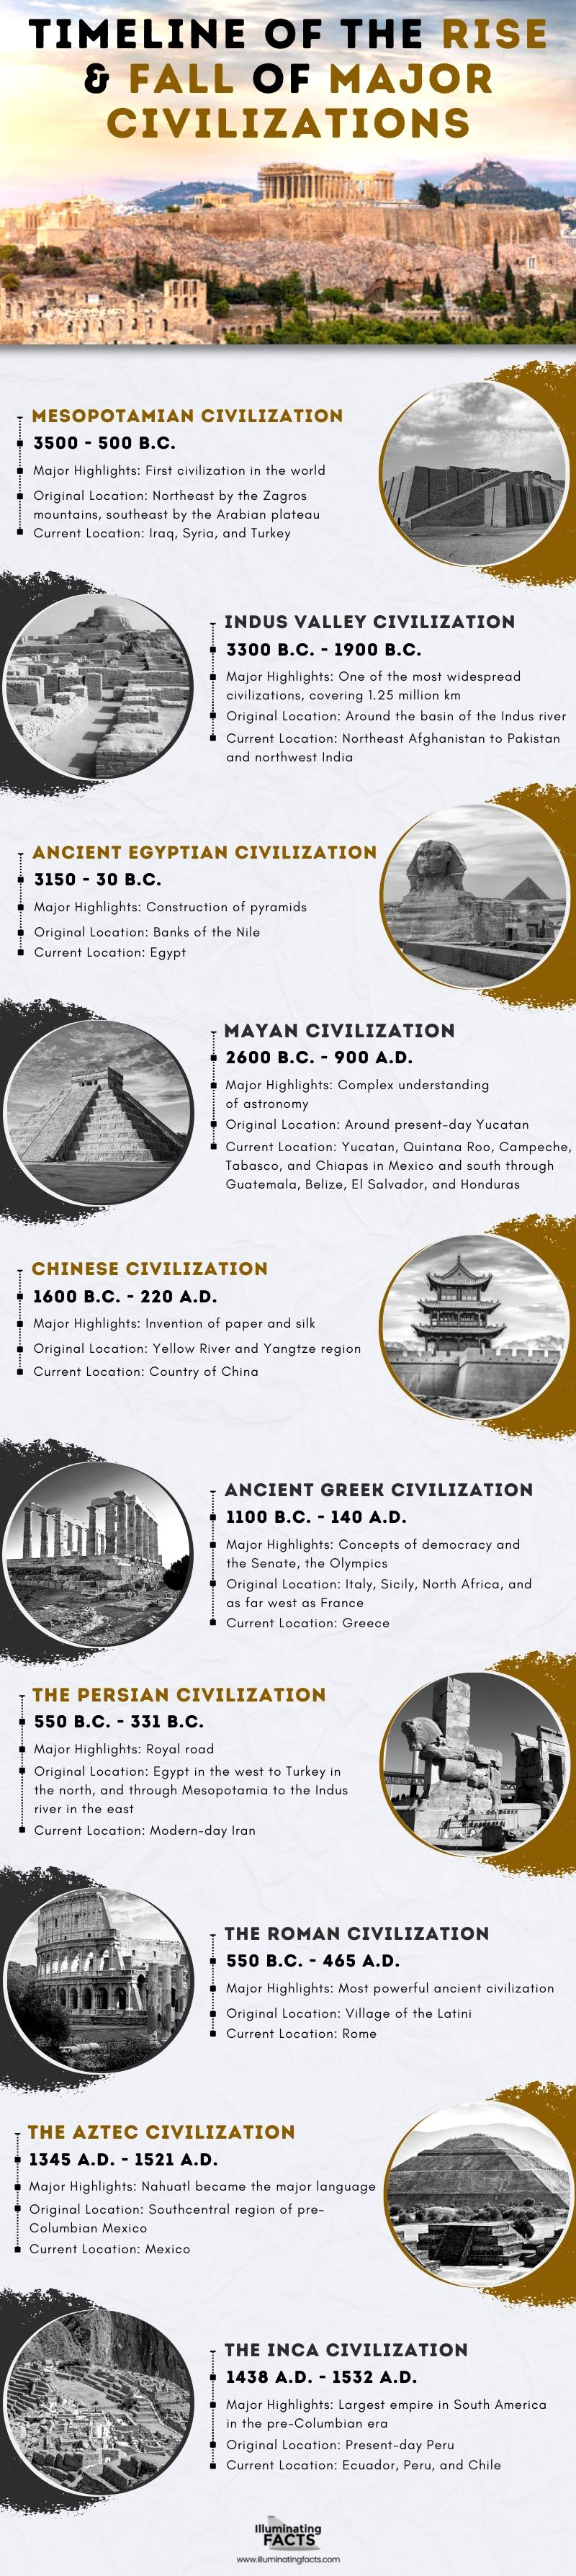 Timeline of the Rise & Fall of Major Civilizations